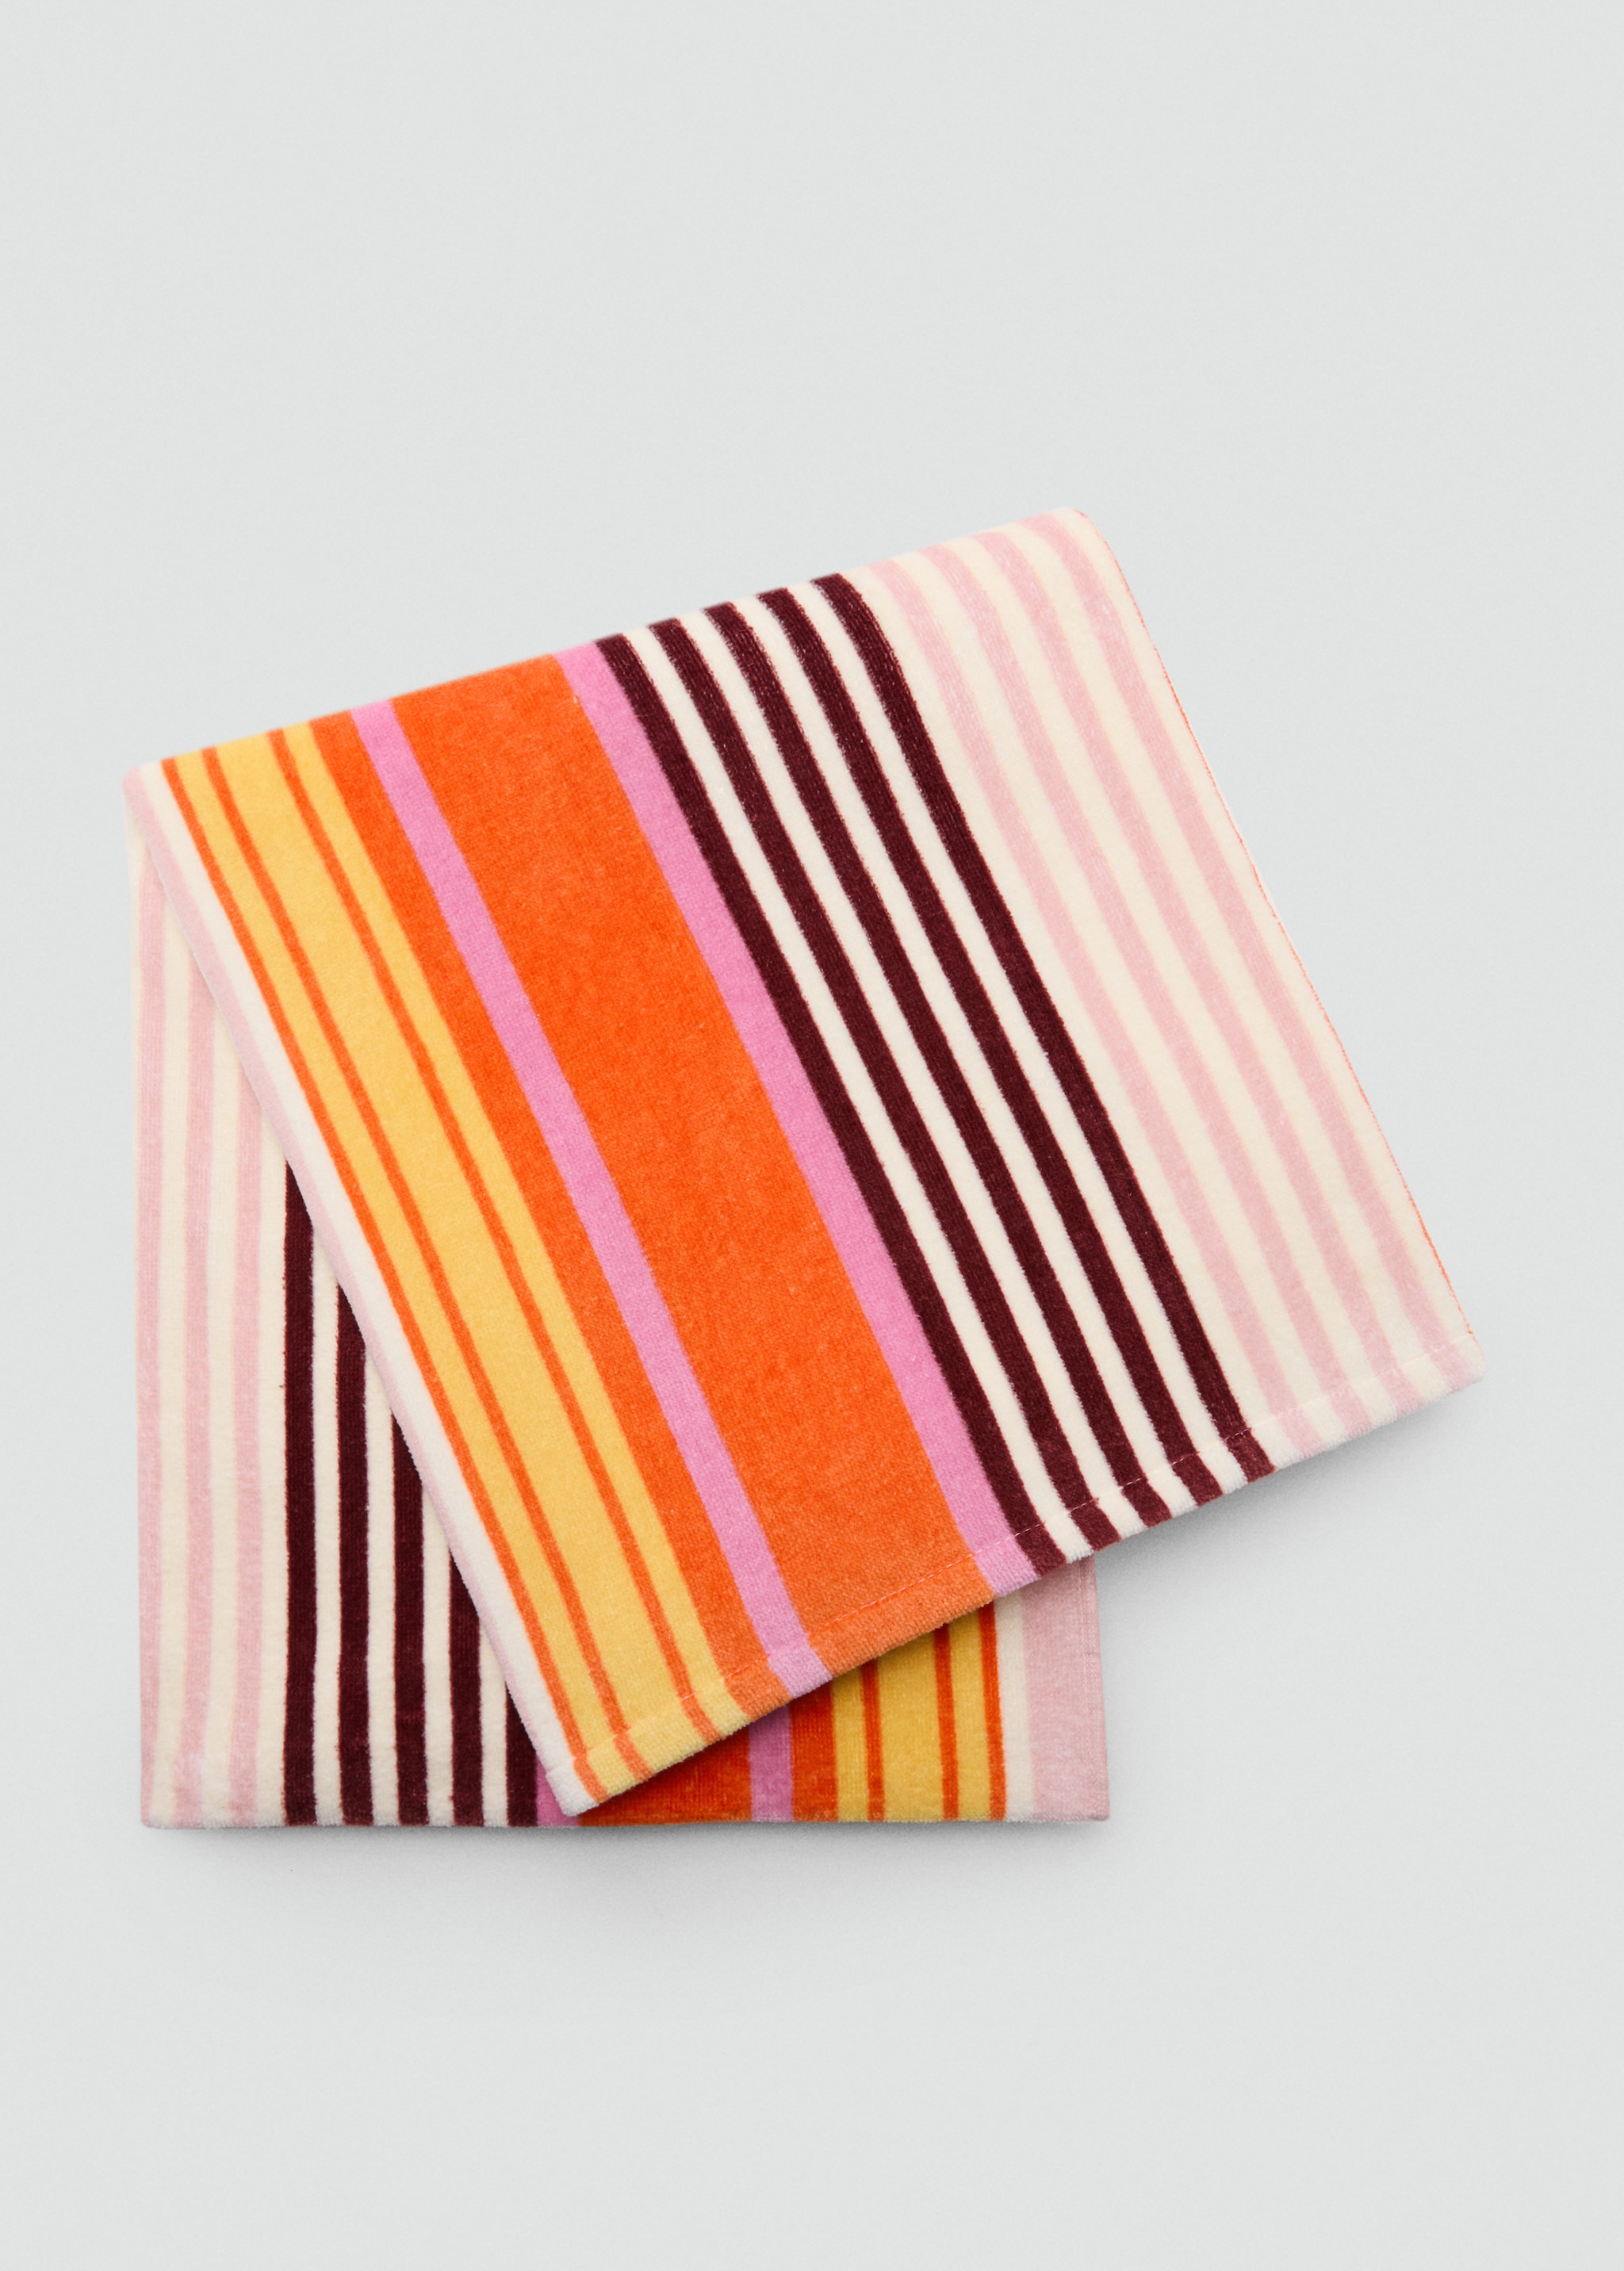 100% cotton striped beach towel - Article without model